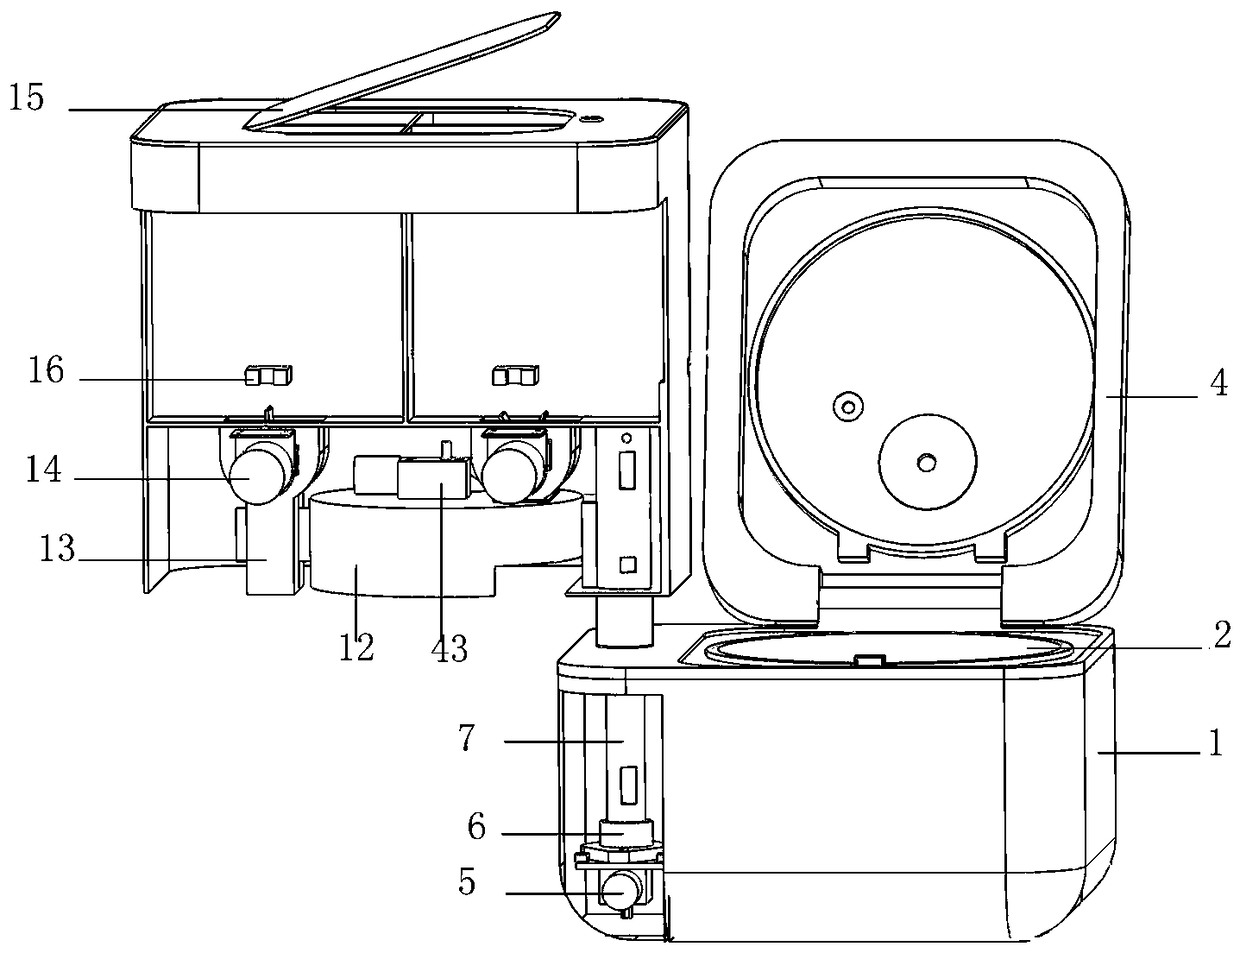 Smart rice cooker and material feeding assembly for same